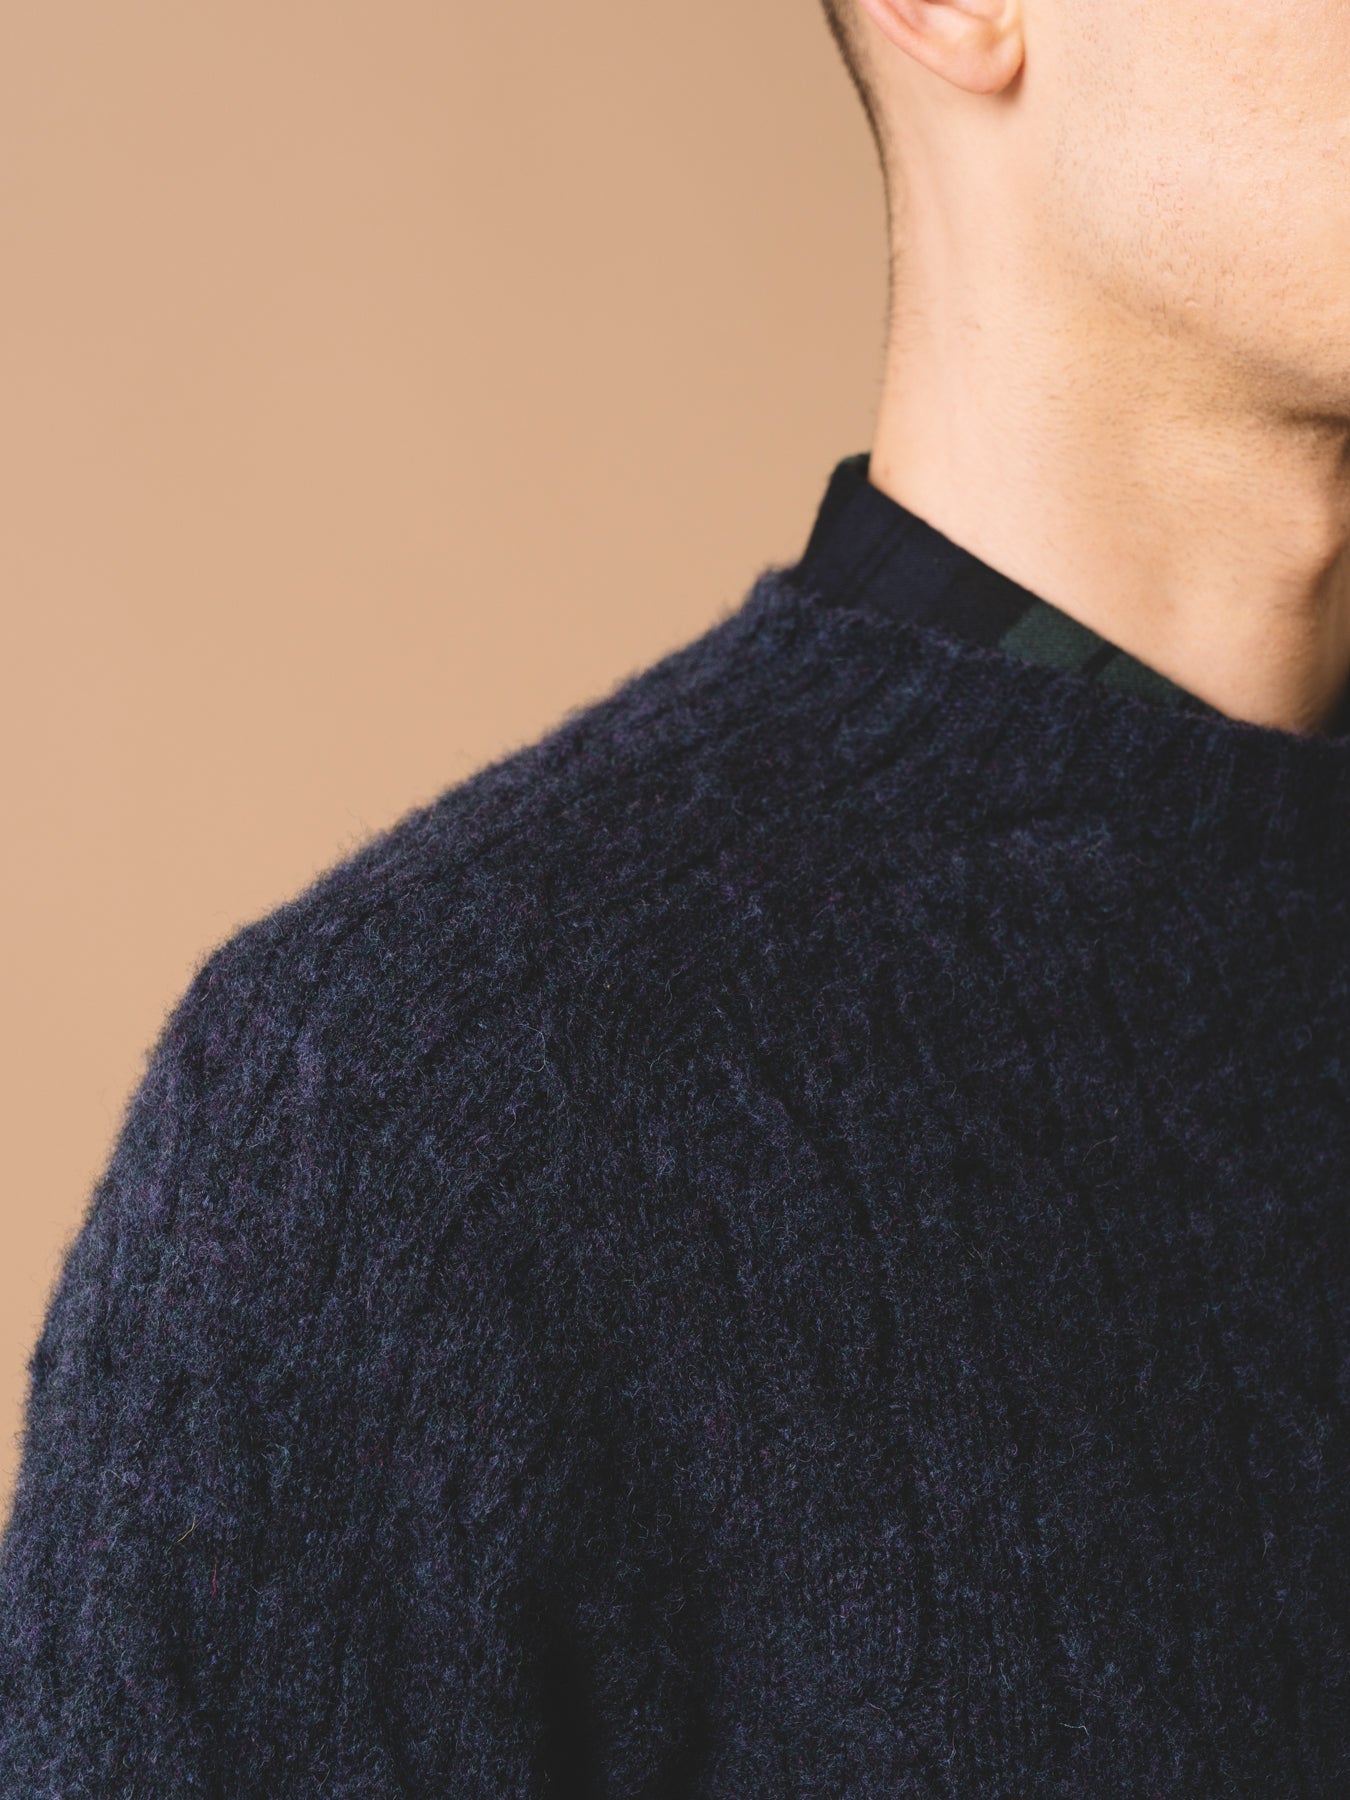 The shoulder and collar of the KESTIN Galloway Knit Sweater in Airforce Blue.